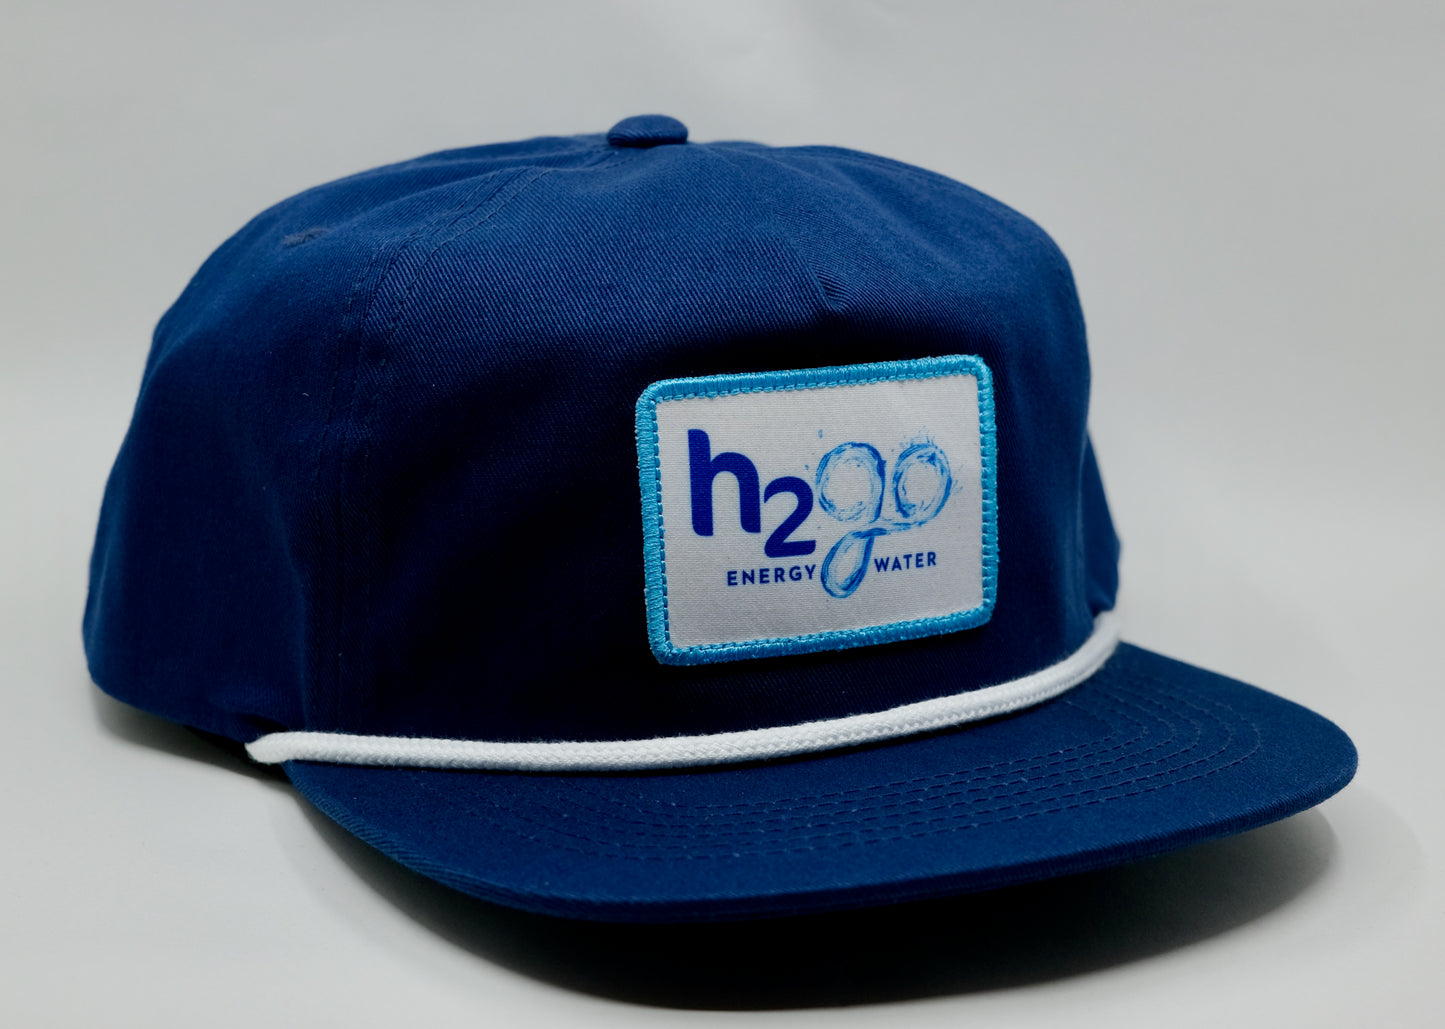 h2go Patch Hat